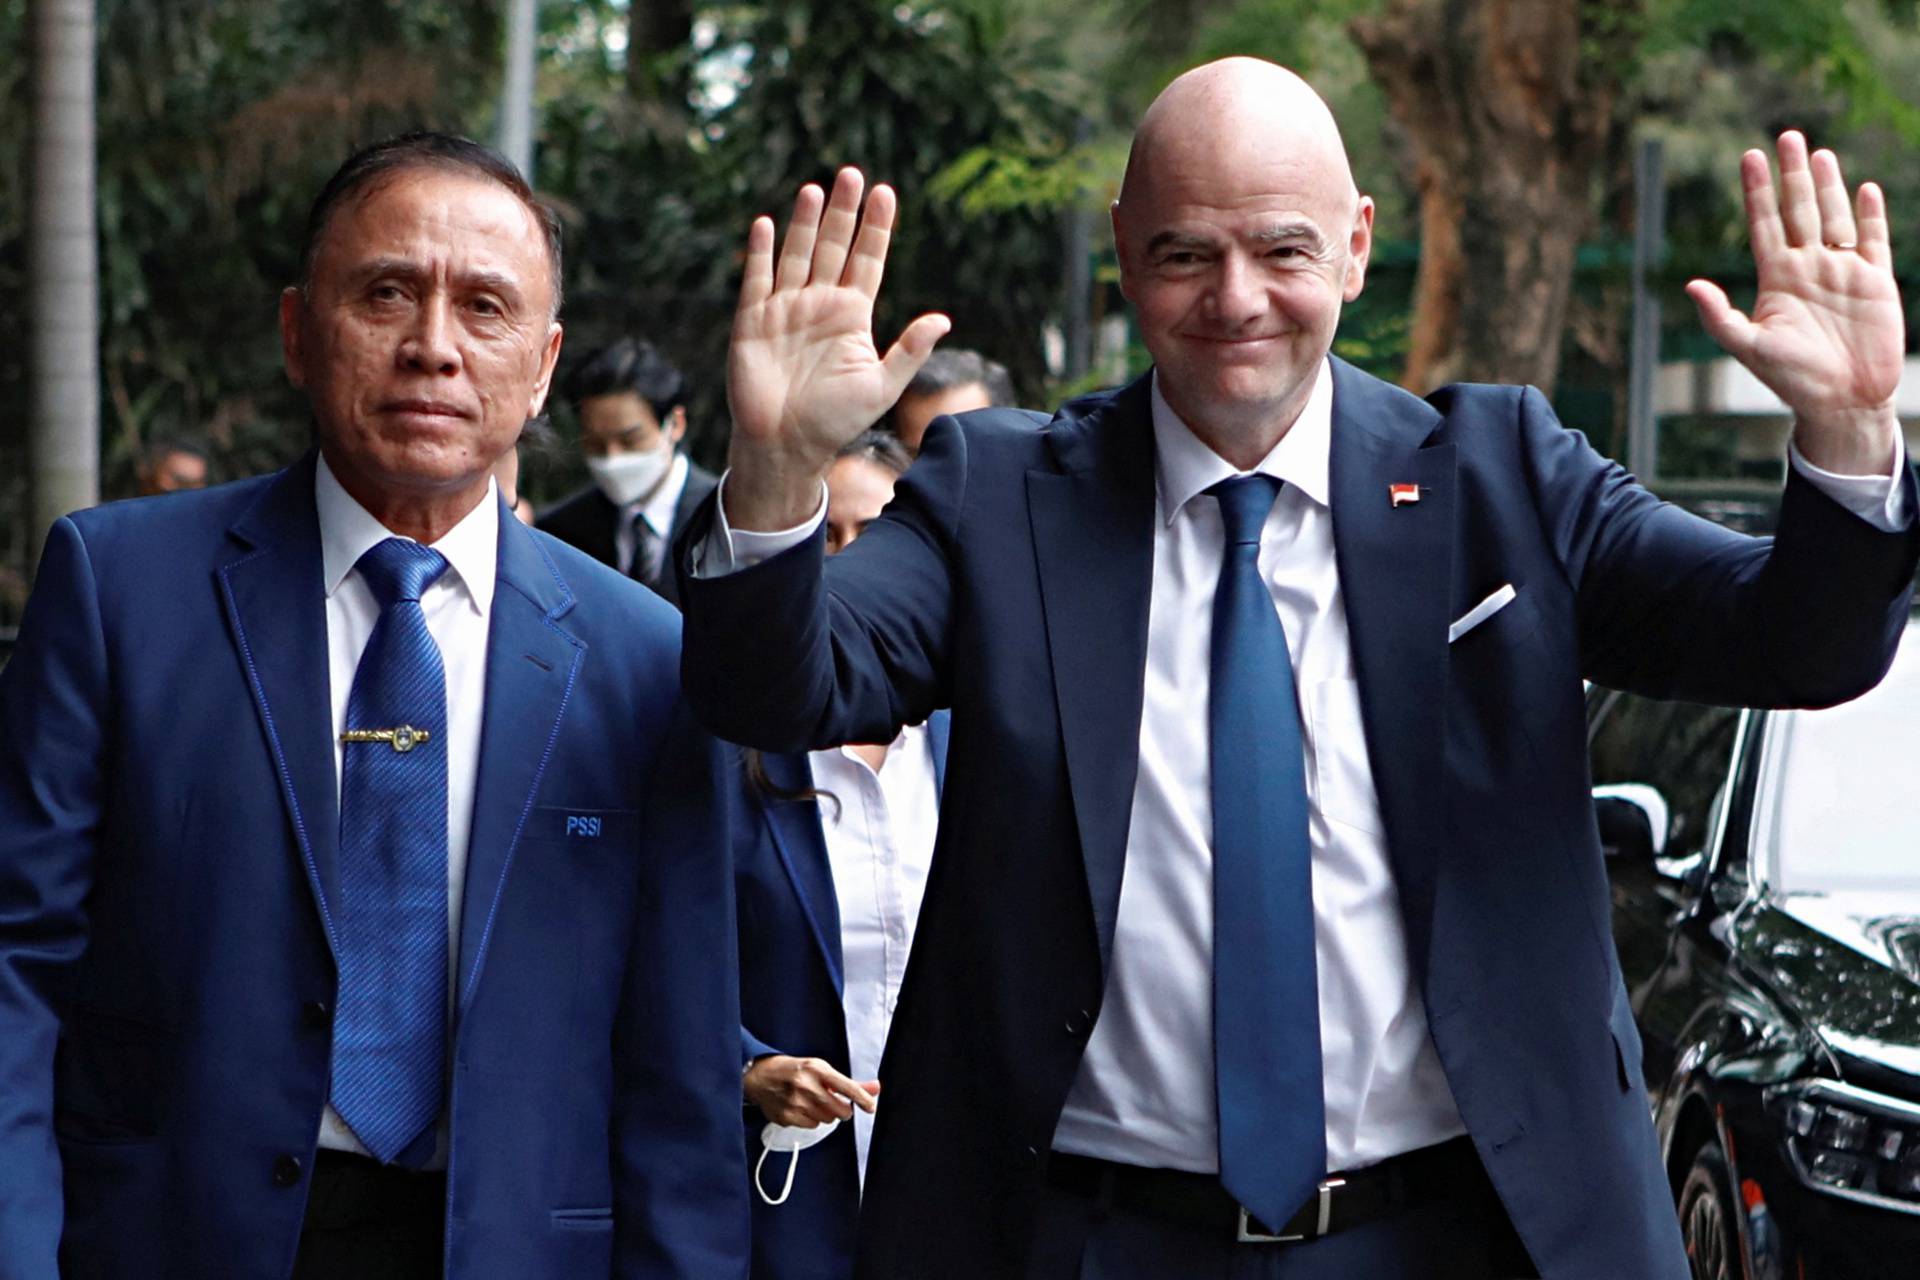 Chairman of the Indonesian Football Association (PSSI) Mochamad Iriawan and FIFA's president Gianni Infantino arrive at PSSI headquarters in Jakarta